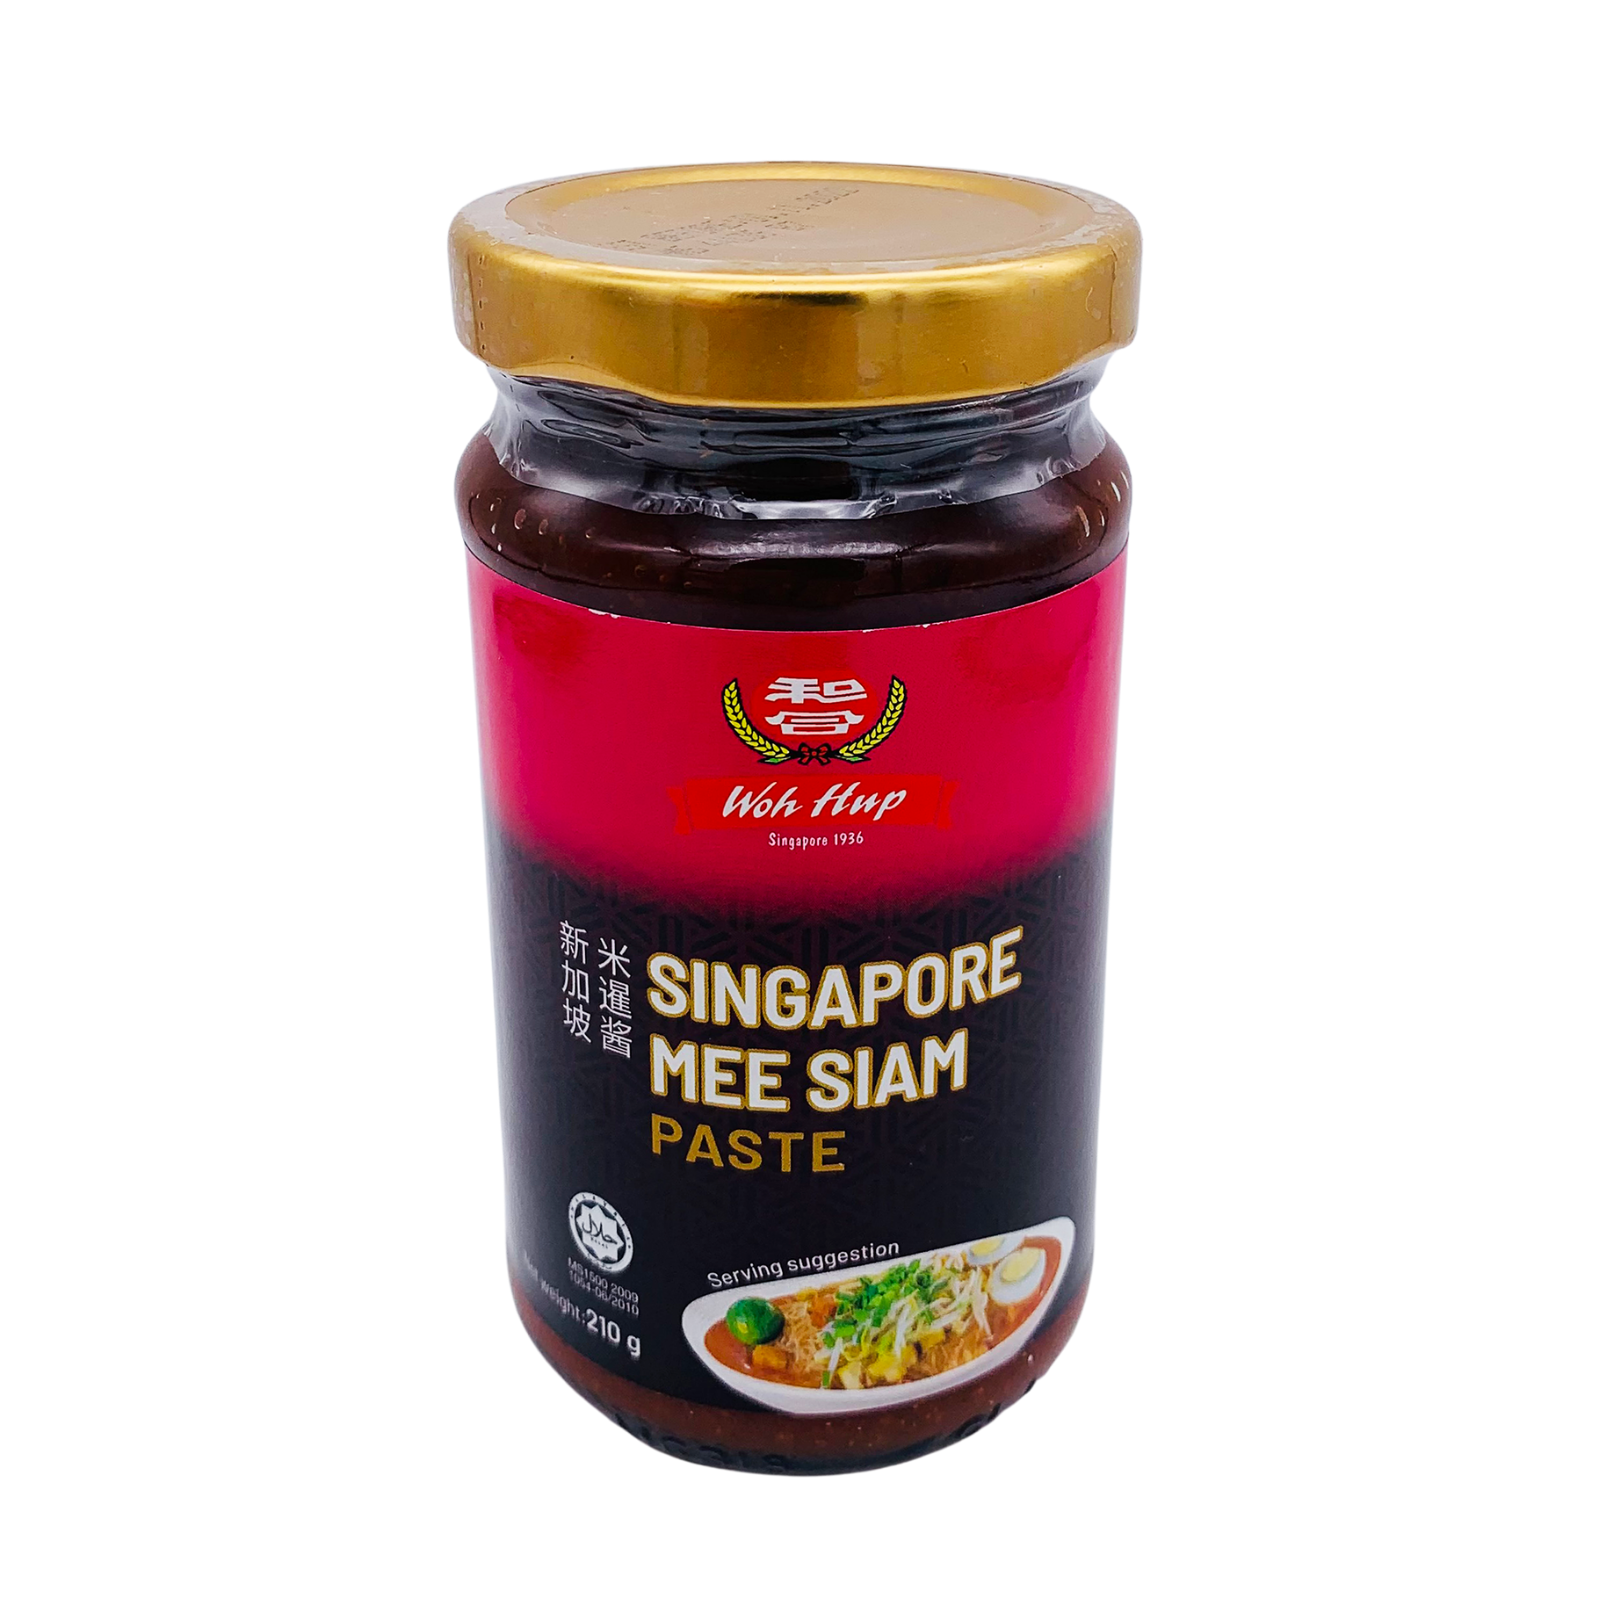 Singapore Mee Siam Paste 210g by Woh Hup